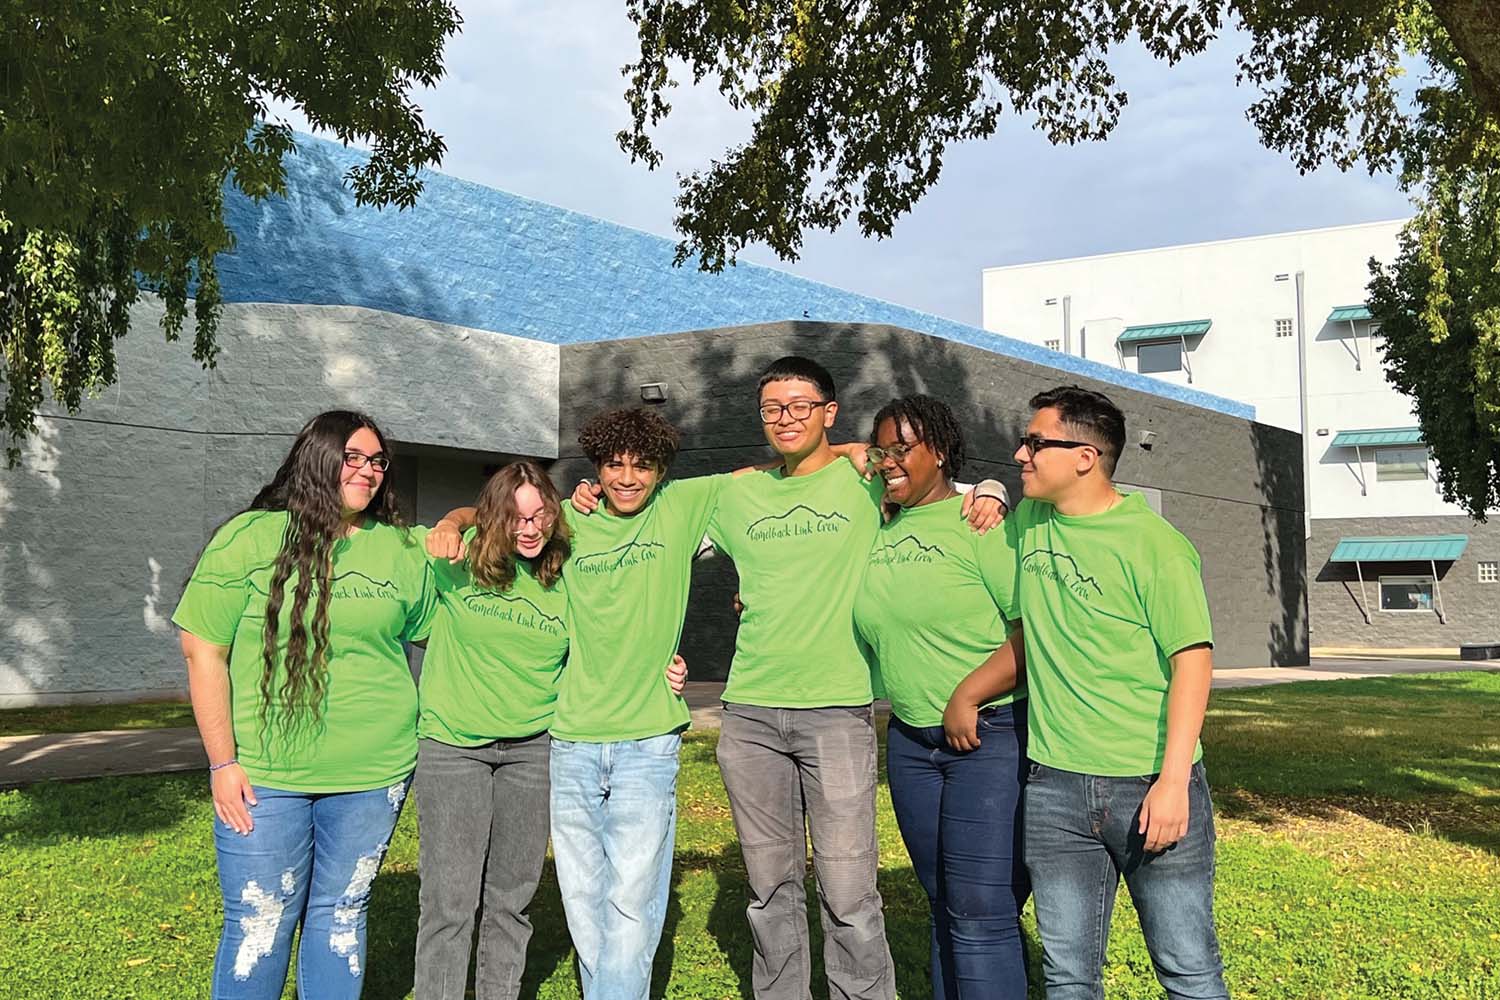 Link Crew offers support, opportunities